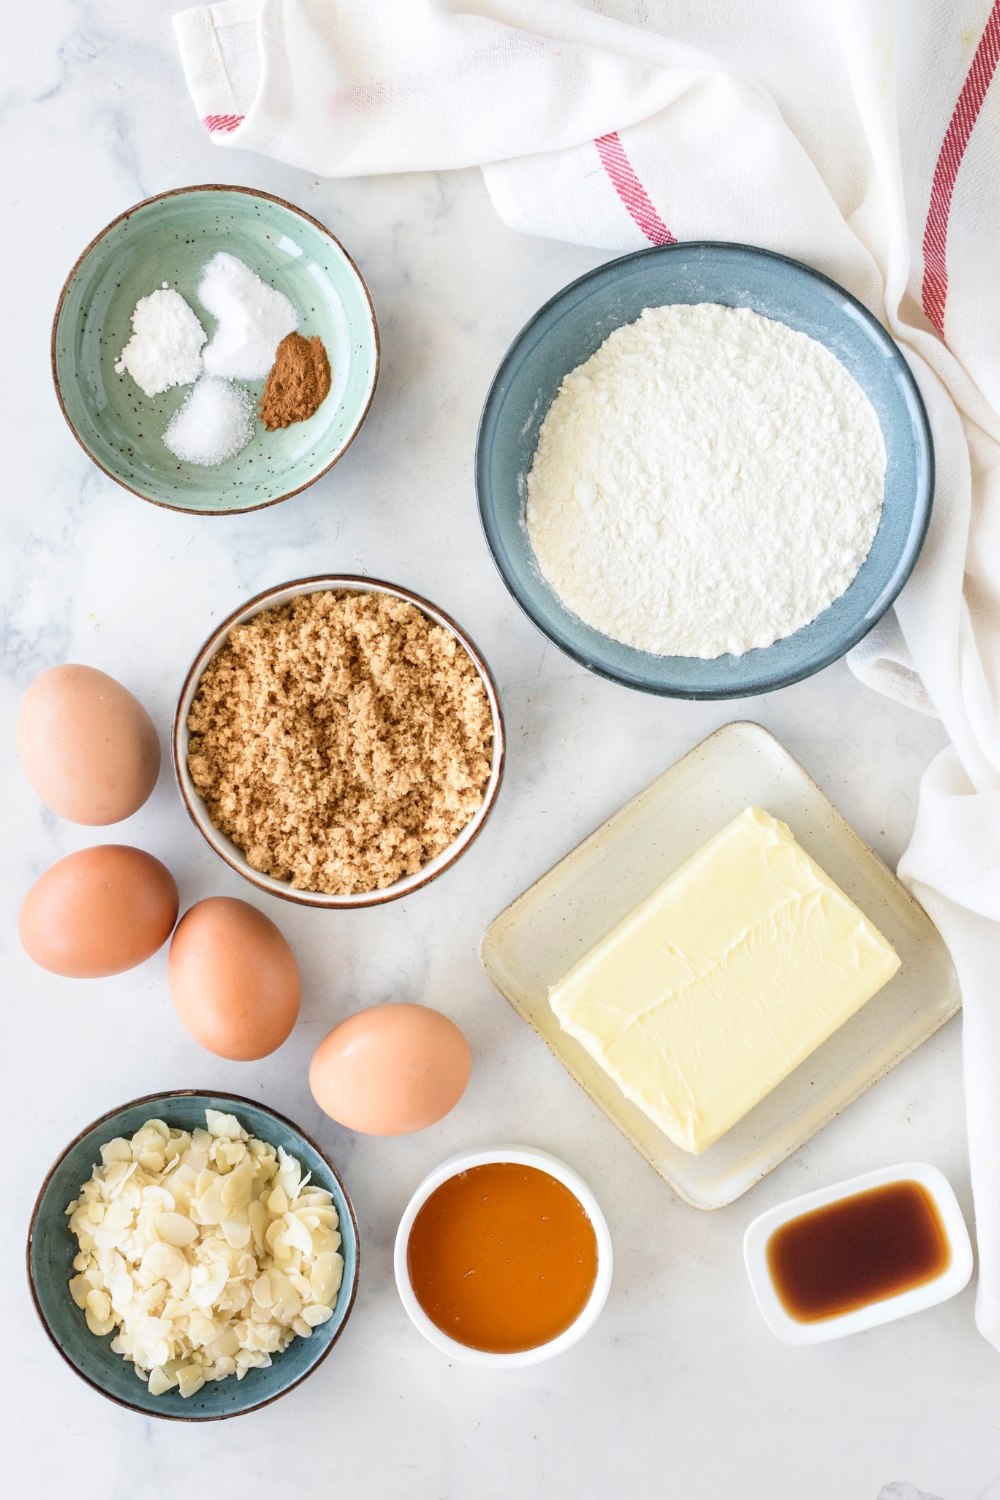 Bowls of flour, brown sugar, sliced almonds, and other dry ingredients, a plate of butter, eggs, and smaller bowls of honey and vanilla extract.